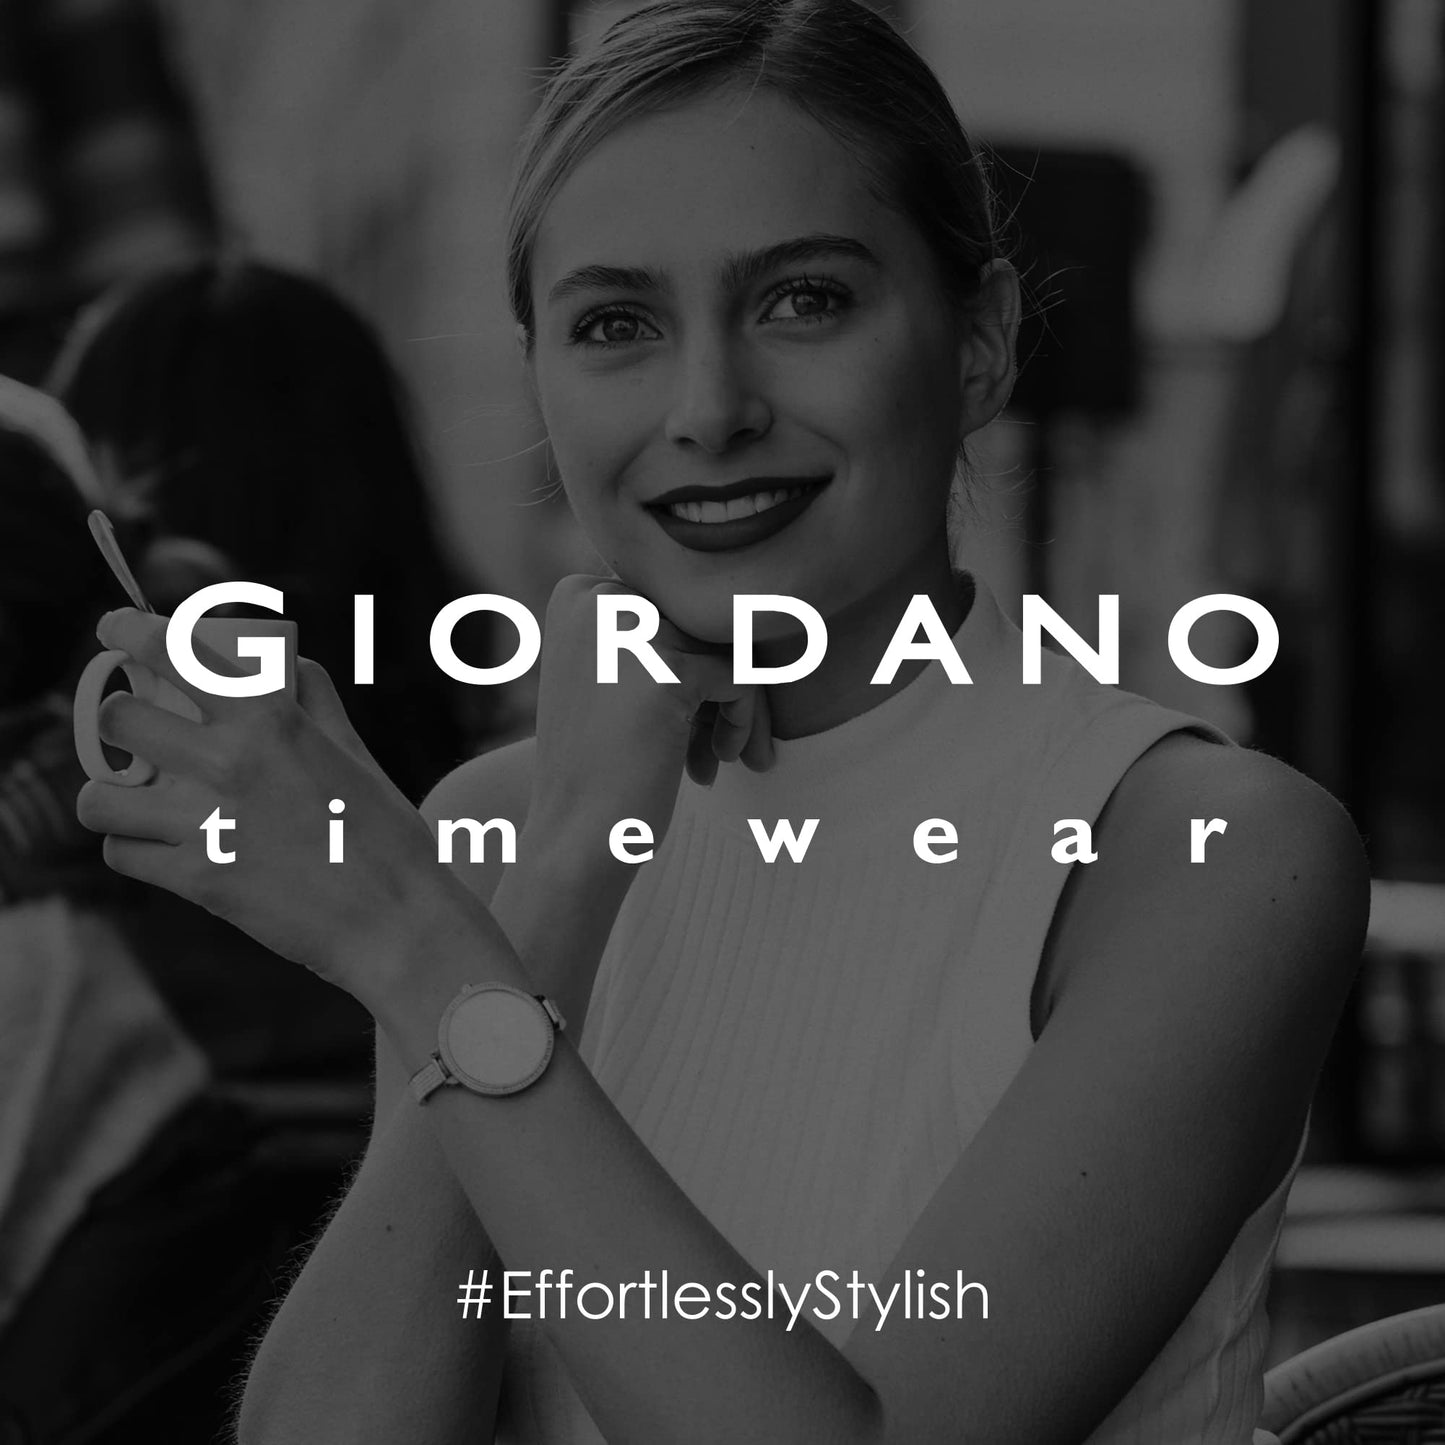 Giordano Analog Stylish Watch for Women Water Resistant Fashion Watch Round Shape with 3 Hand Mechanism Wrist Watch to Compliment Your Look/Ideal Gift for Female - GZ-60076-11